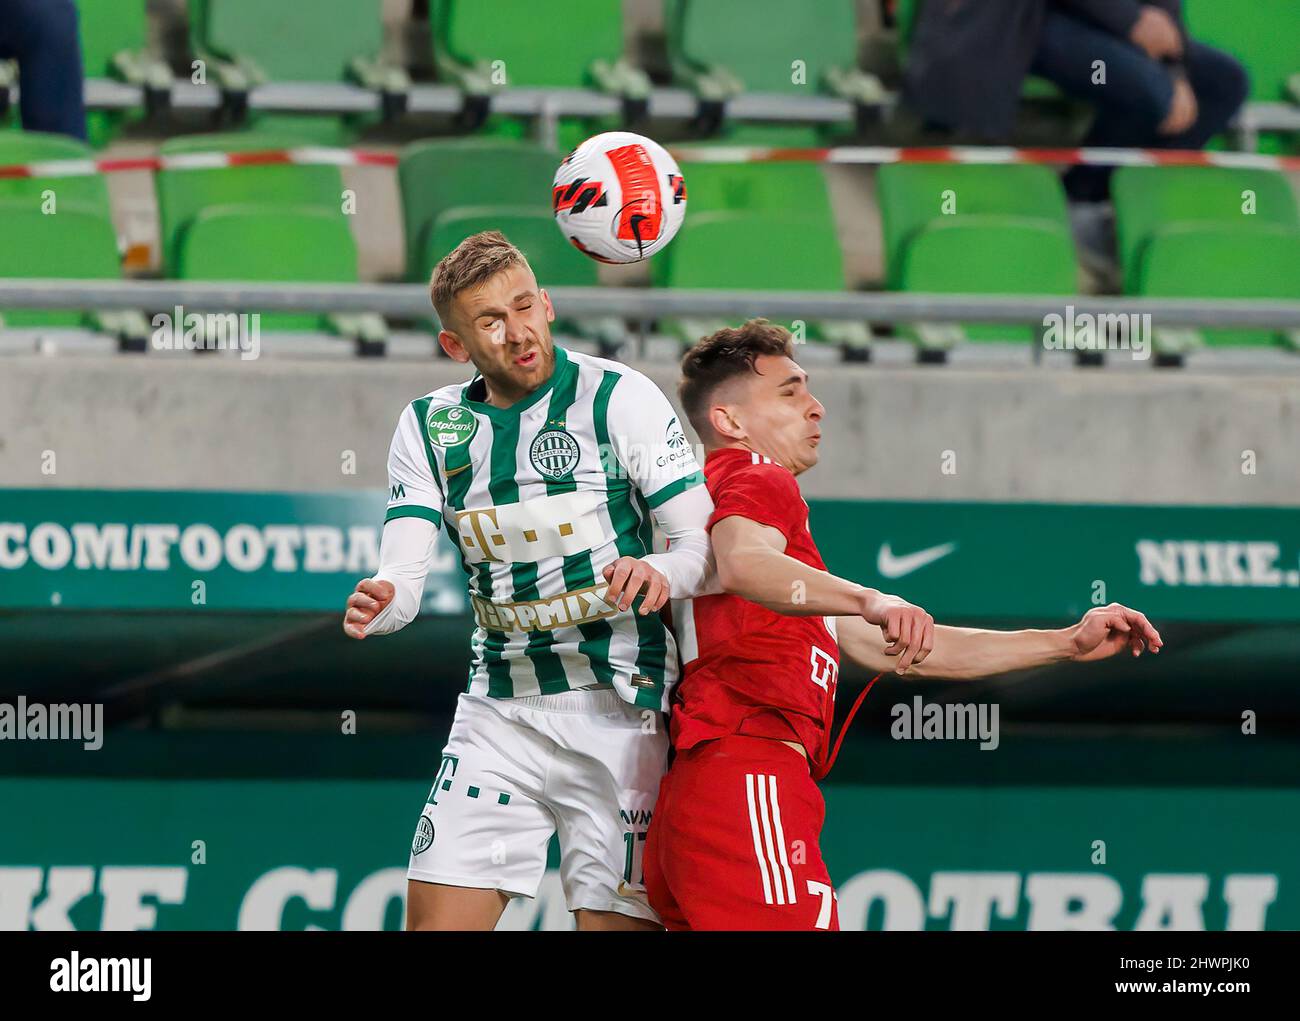 Eldar Civic Soccer Player Fc High Resolution Stock Photography and Images -  Alamy